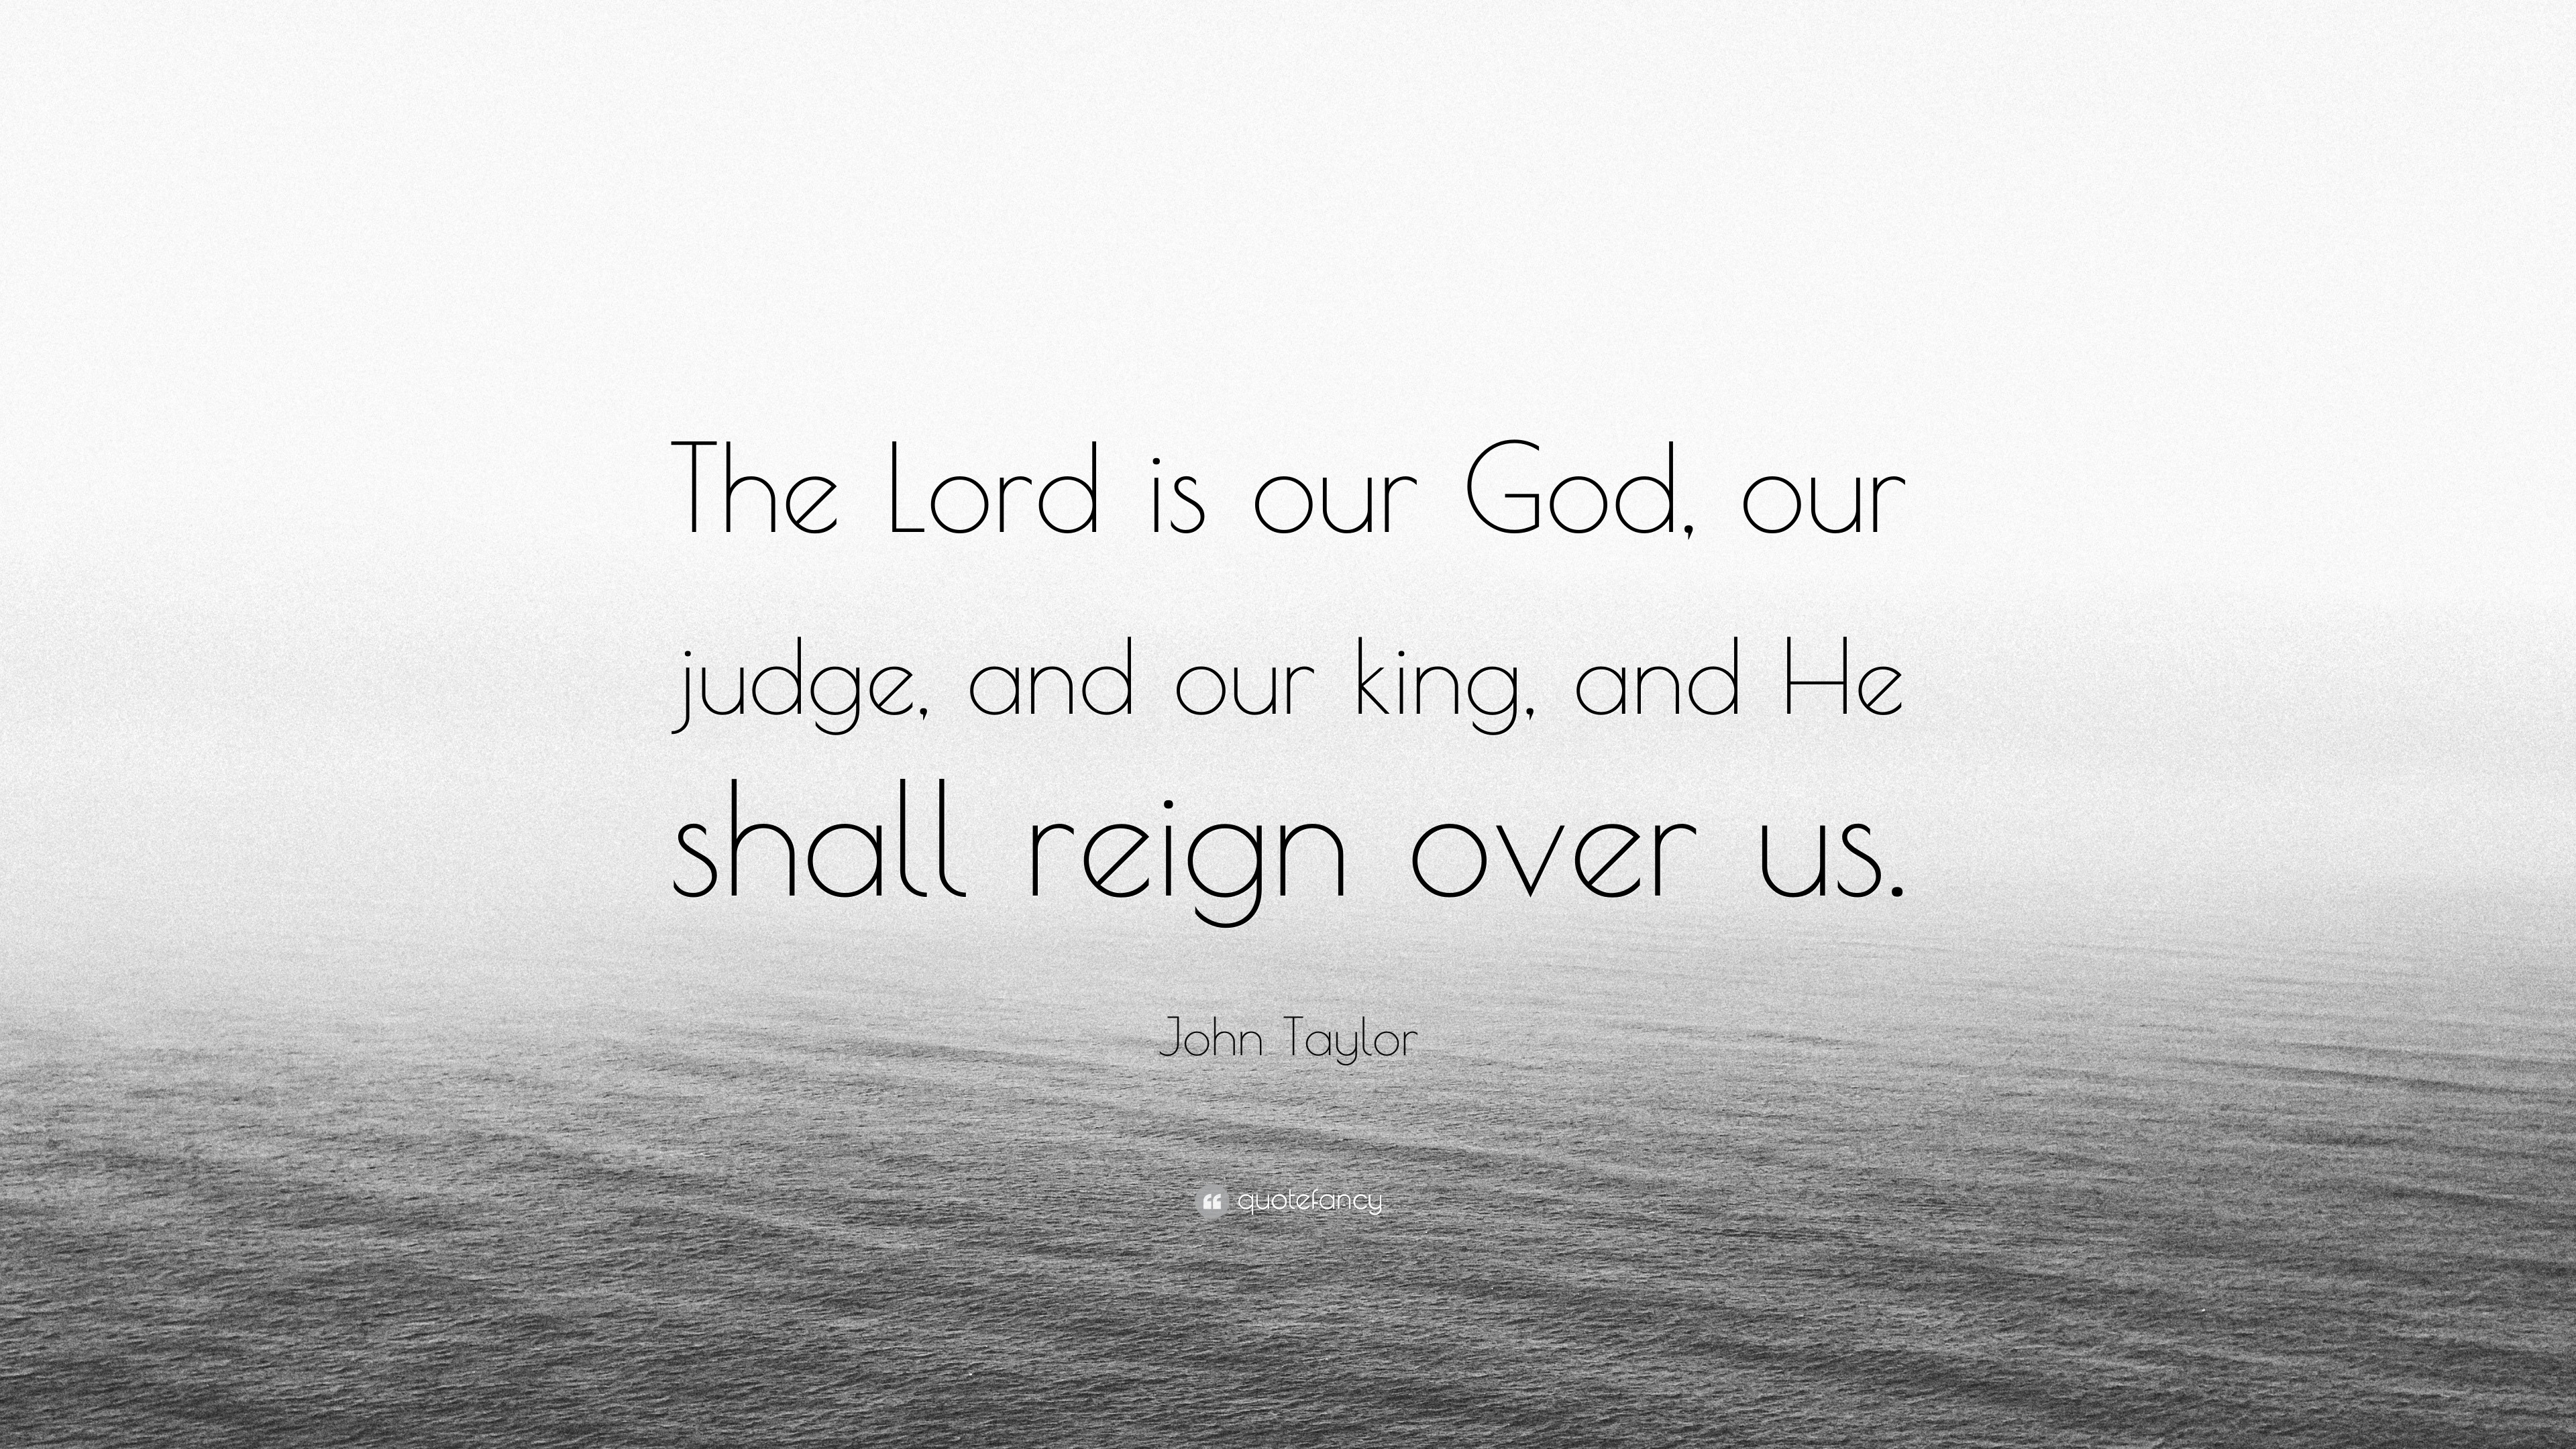 The Lord is our God, our judge, and our king, and He shall reign over us. 